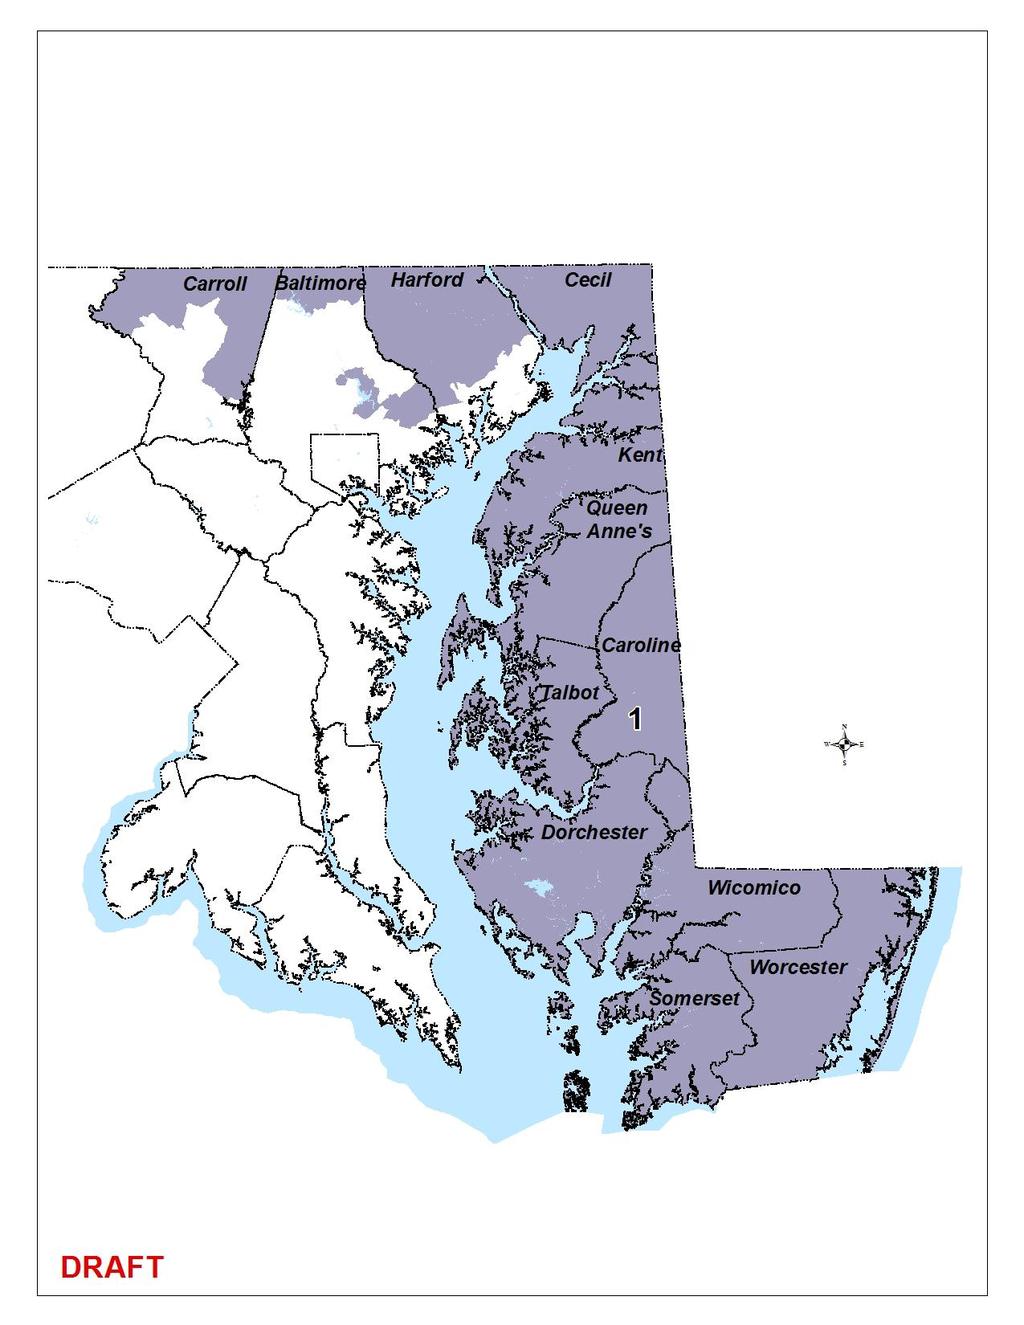 District 1: Eastern Shore 9 Eastern Shore Counties are kept together.